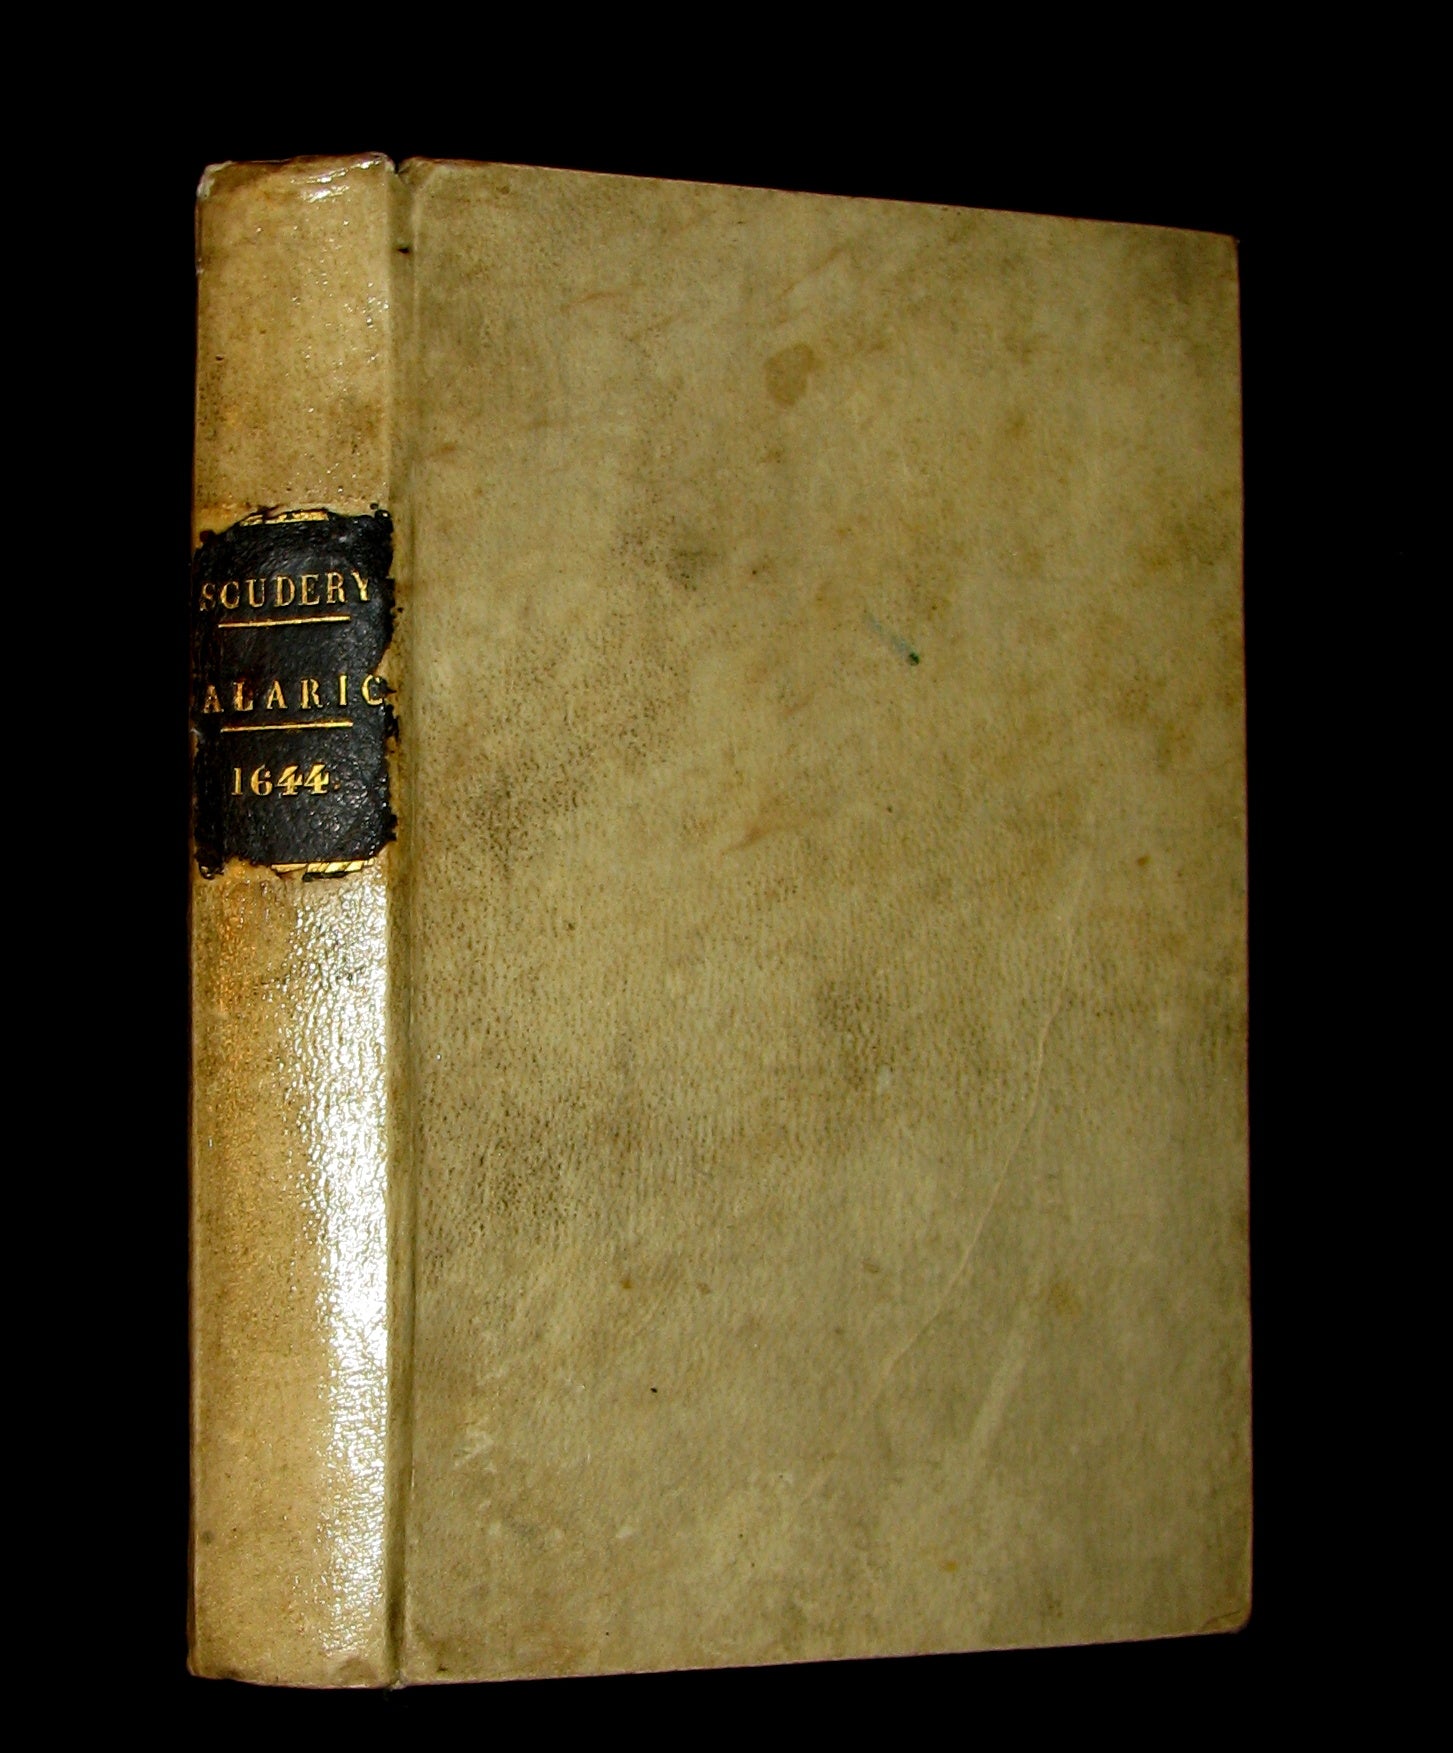 1654 Scarce French Vellum Book - ALARIC King of the Visigoths by Georges de Scudery